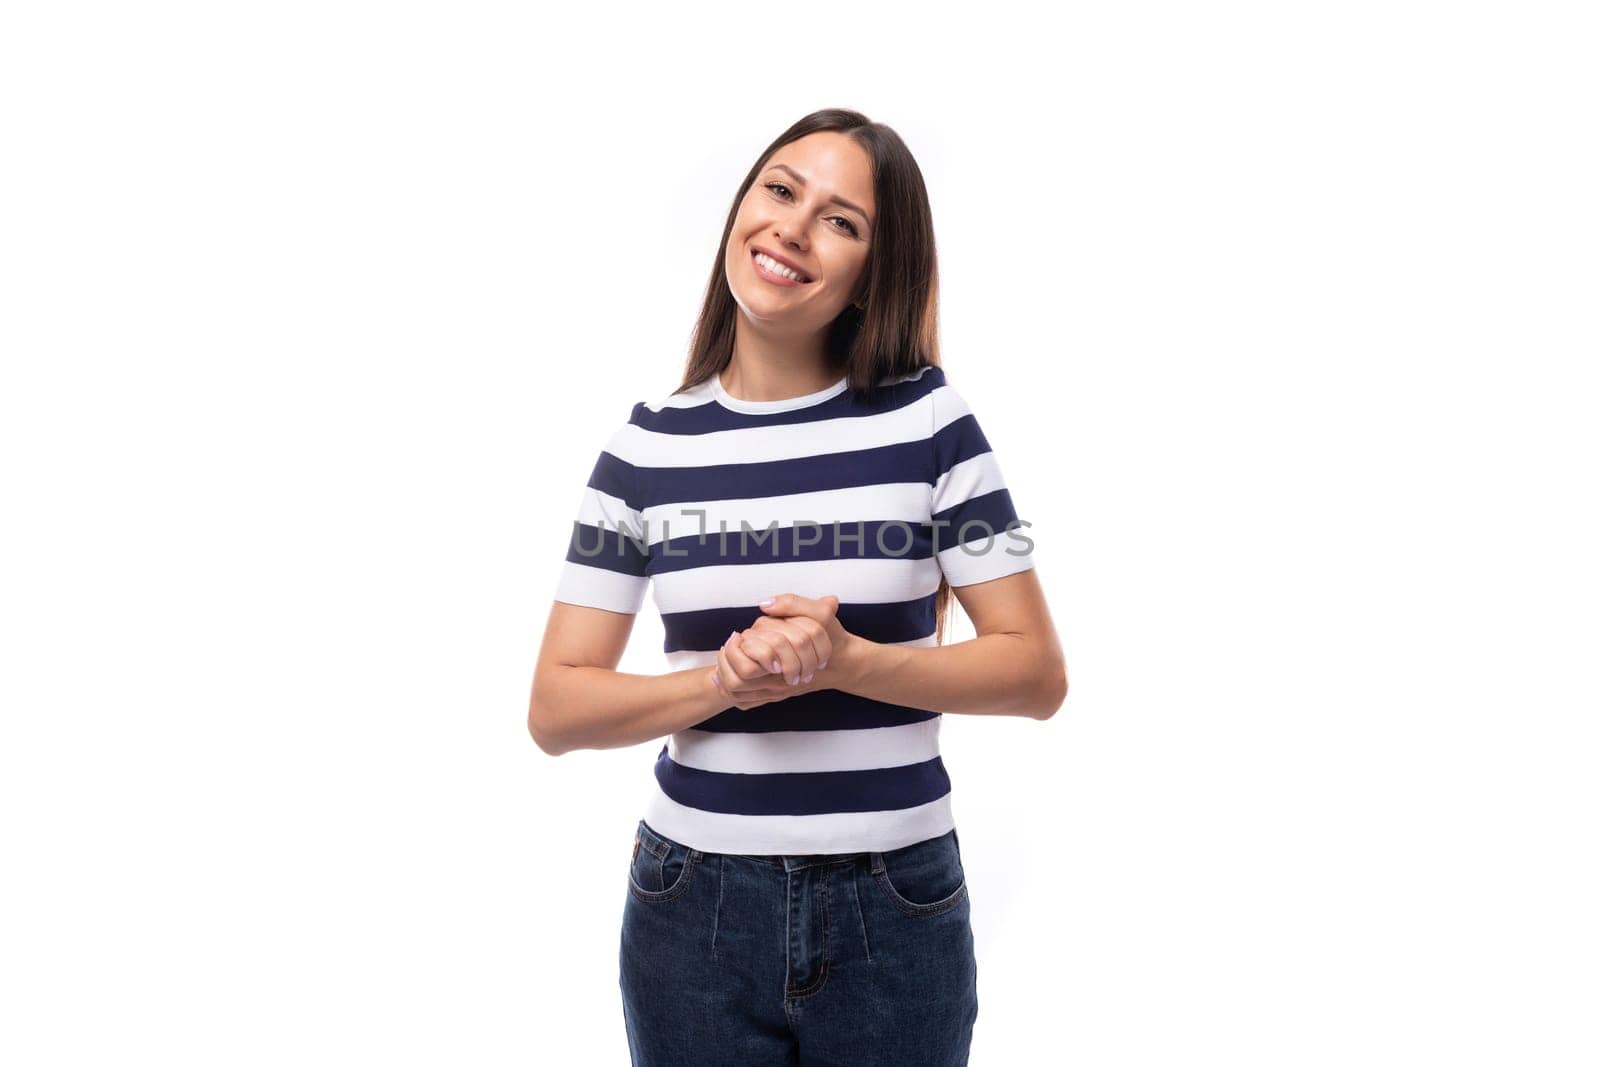 joyful young european promoter woman with black straight hair in a striped black and white t-shirt and jeans.